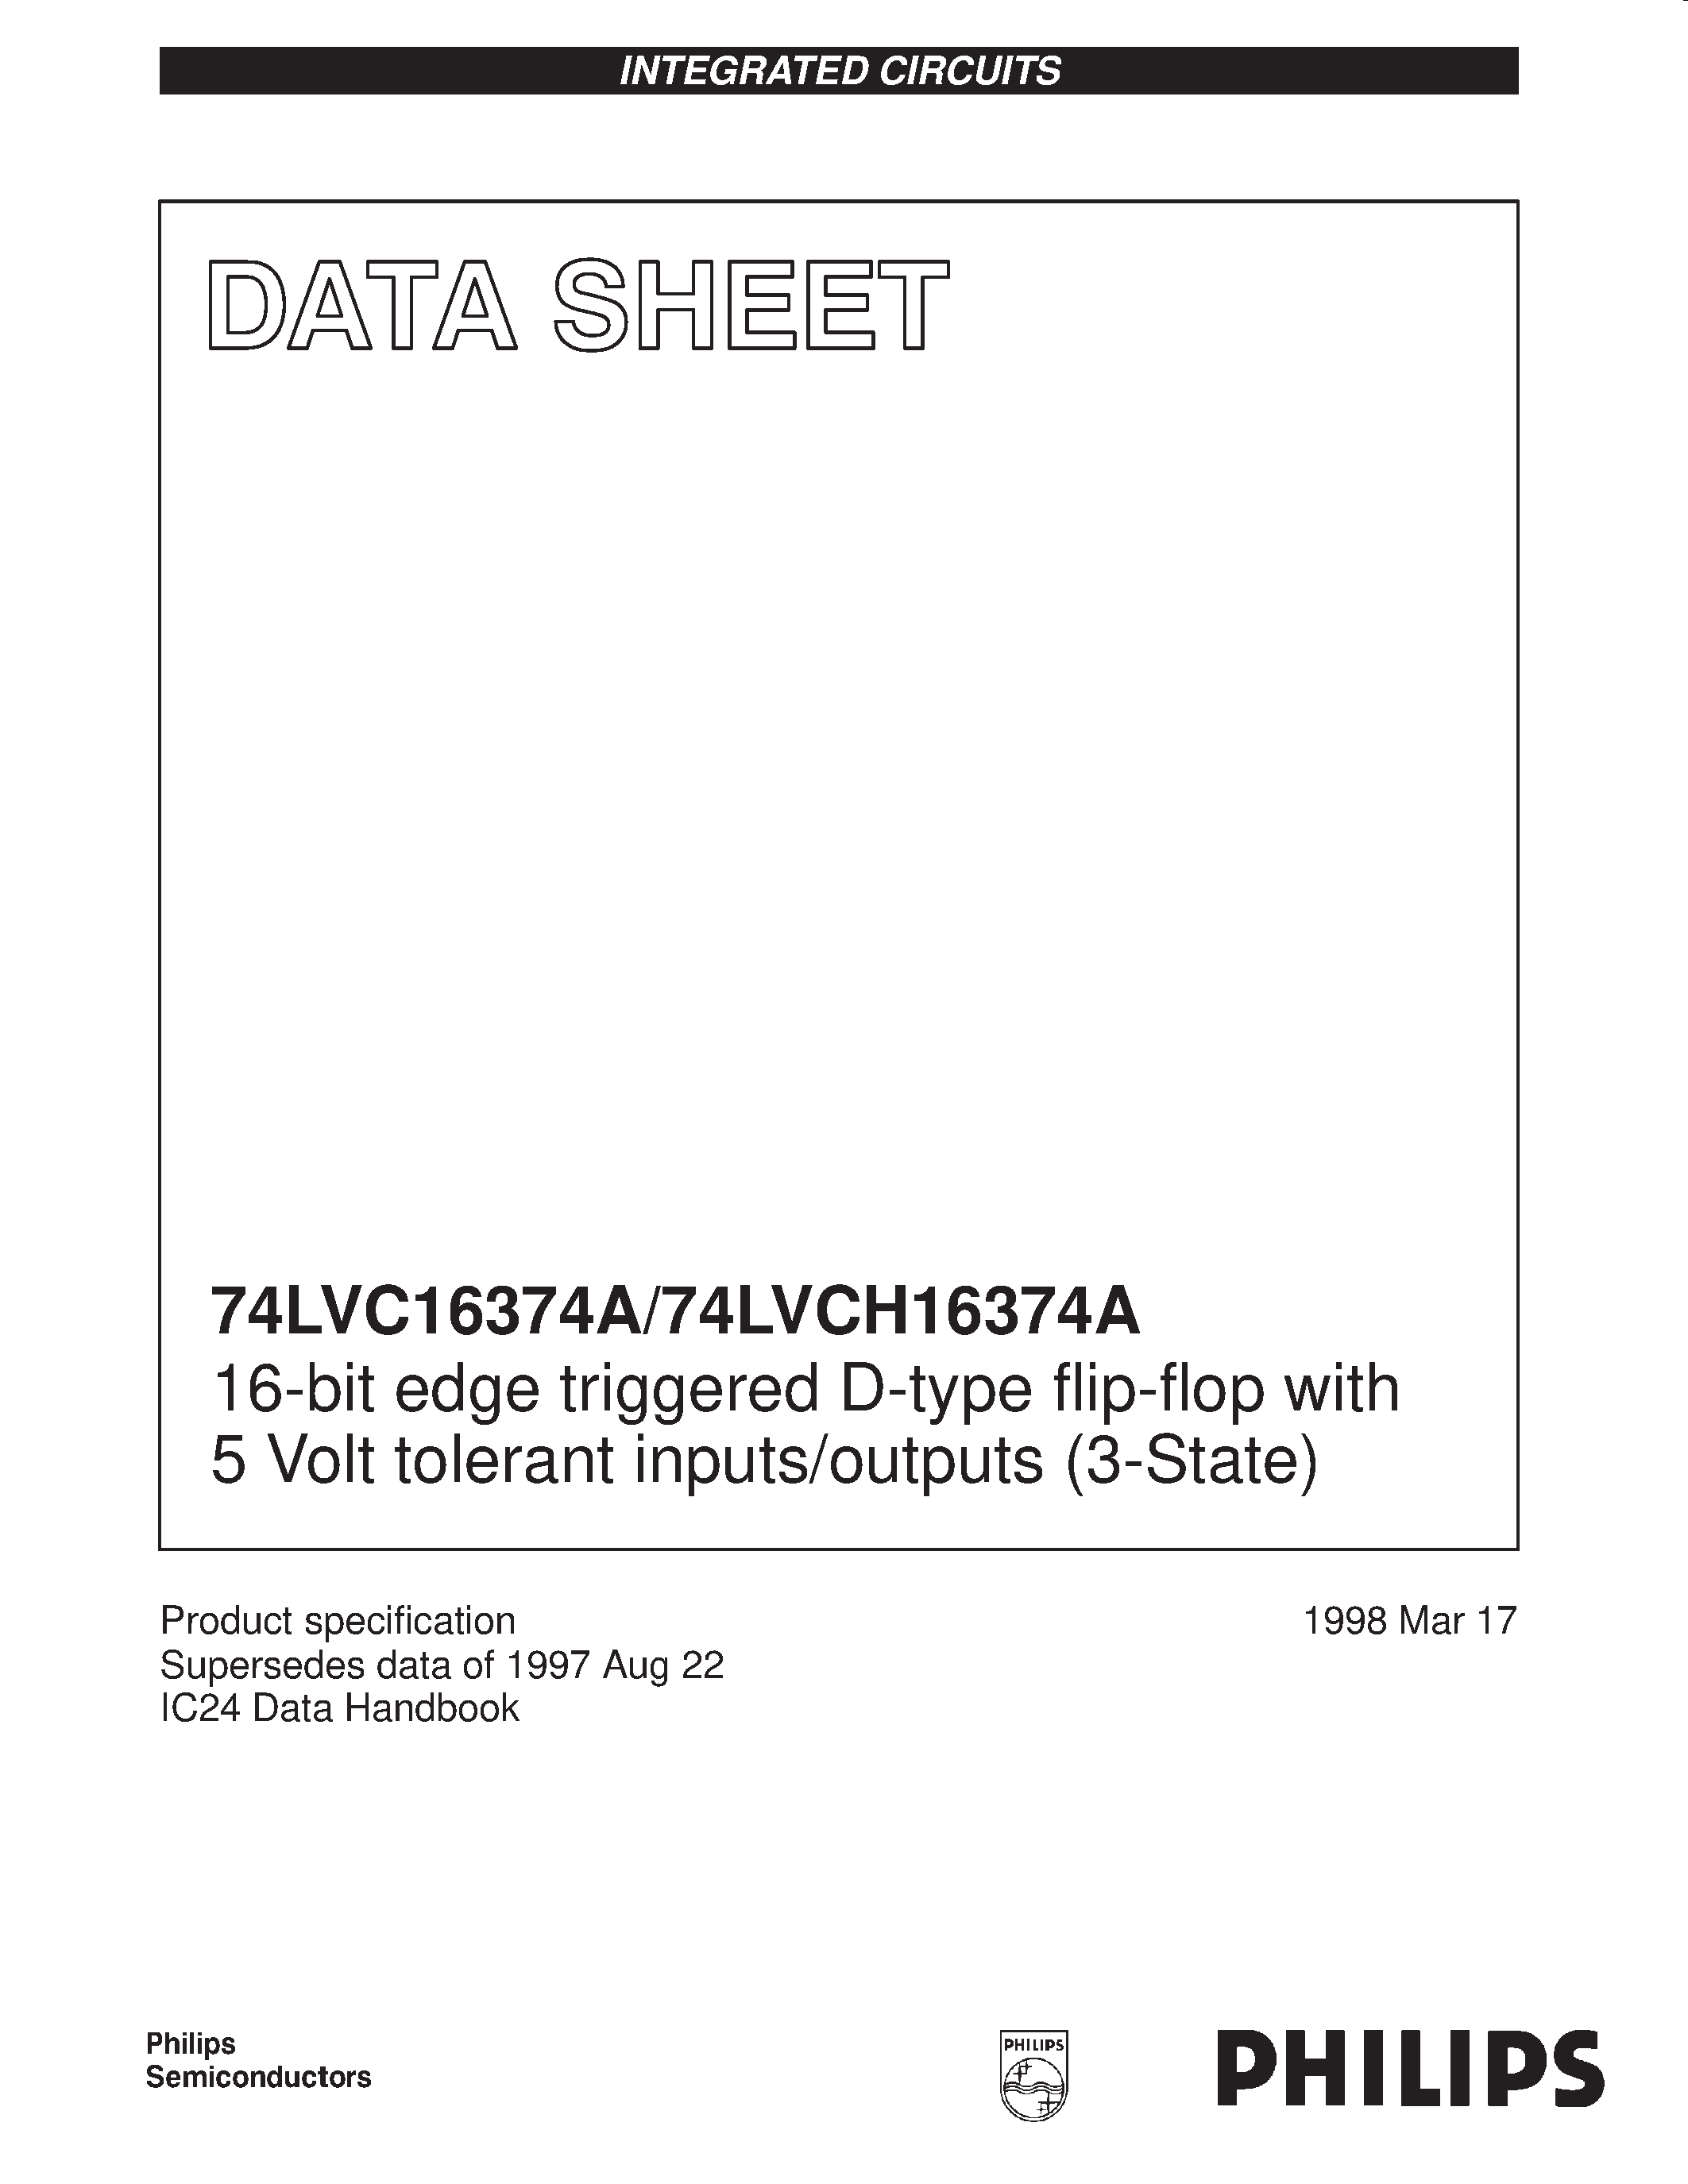 Datasheet VC16374ADGG - 16-bit edge triggered D-type flip-flop with 5 Volt tolerant inputs/outputs 3-State page 1